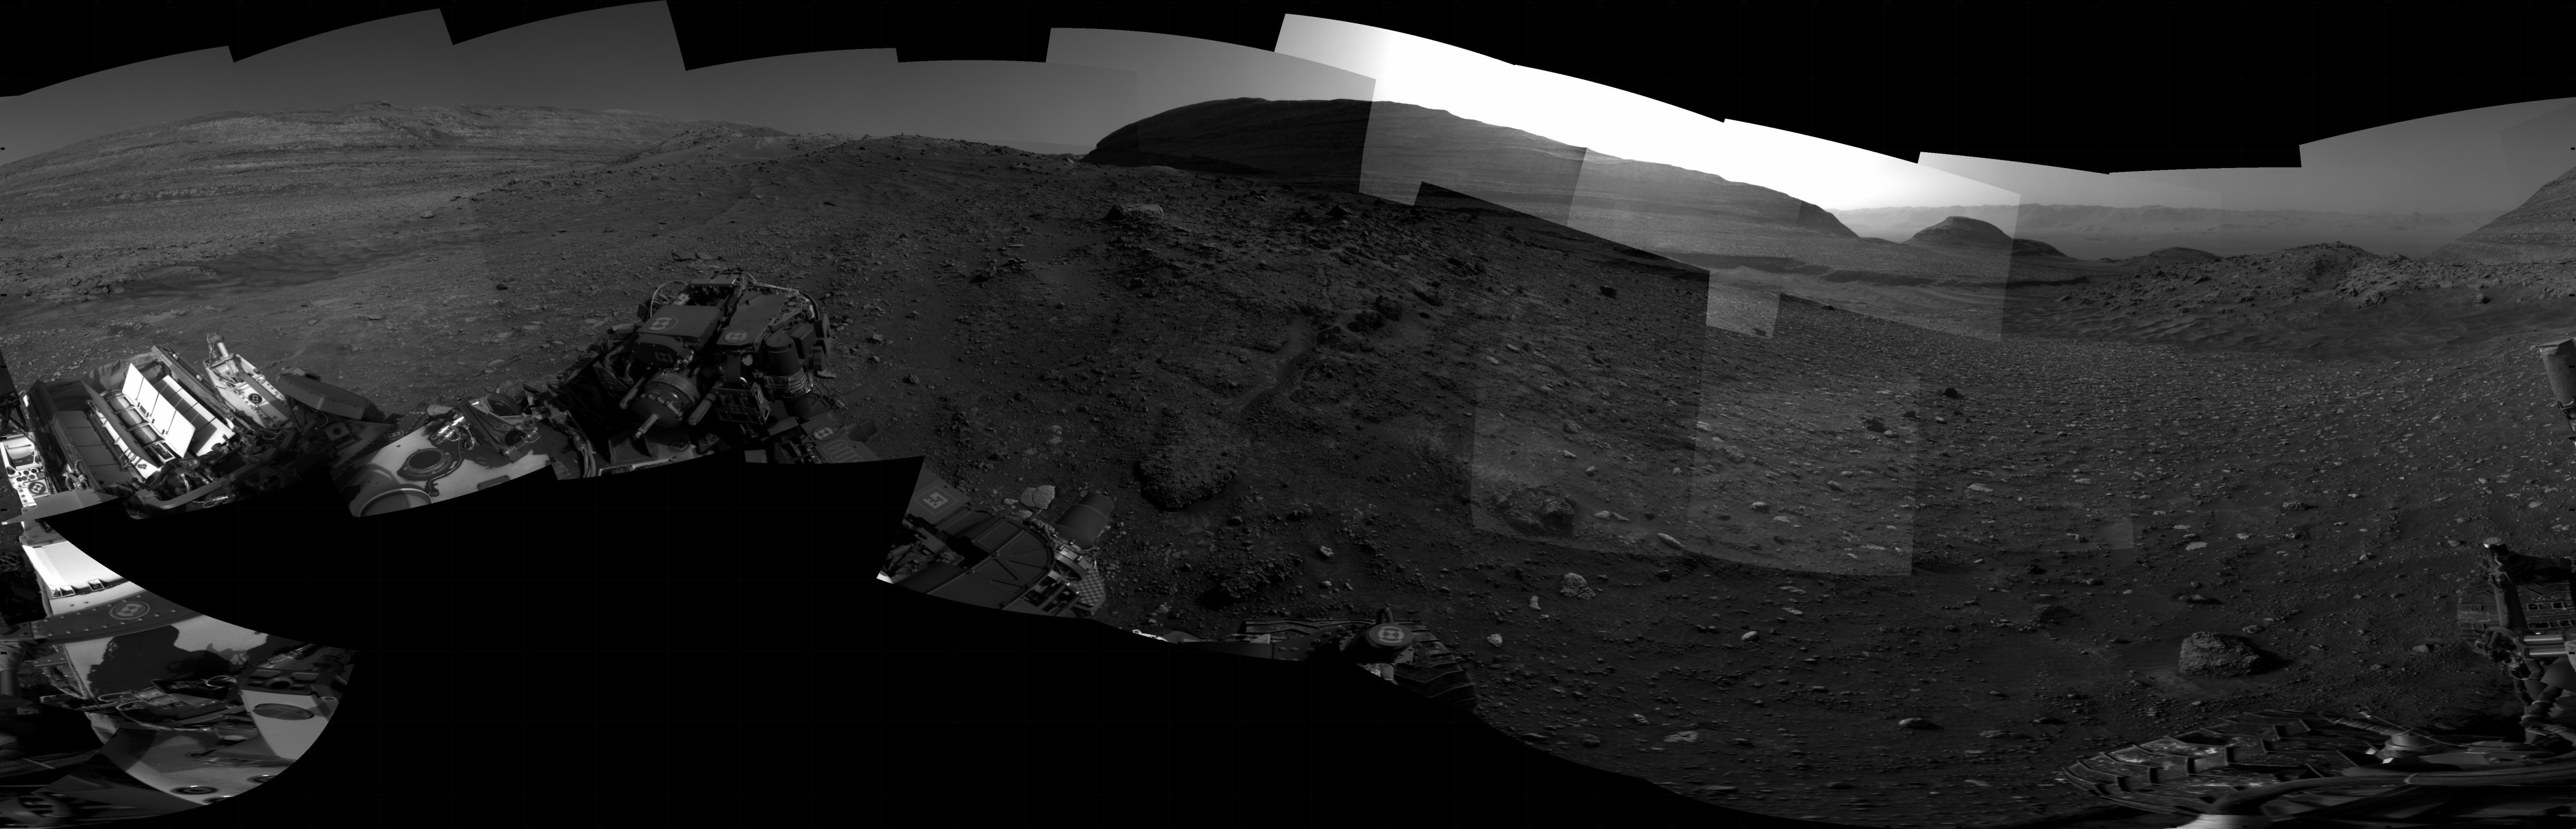 A black and white photographic panorama of the surface of Mars, showing rolling hills in the distance, with the foreground a mixture of areas with soil, gravel and small rocks, of windswept dunes, and of large broken slabs of flat rock.